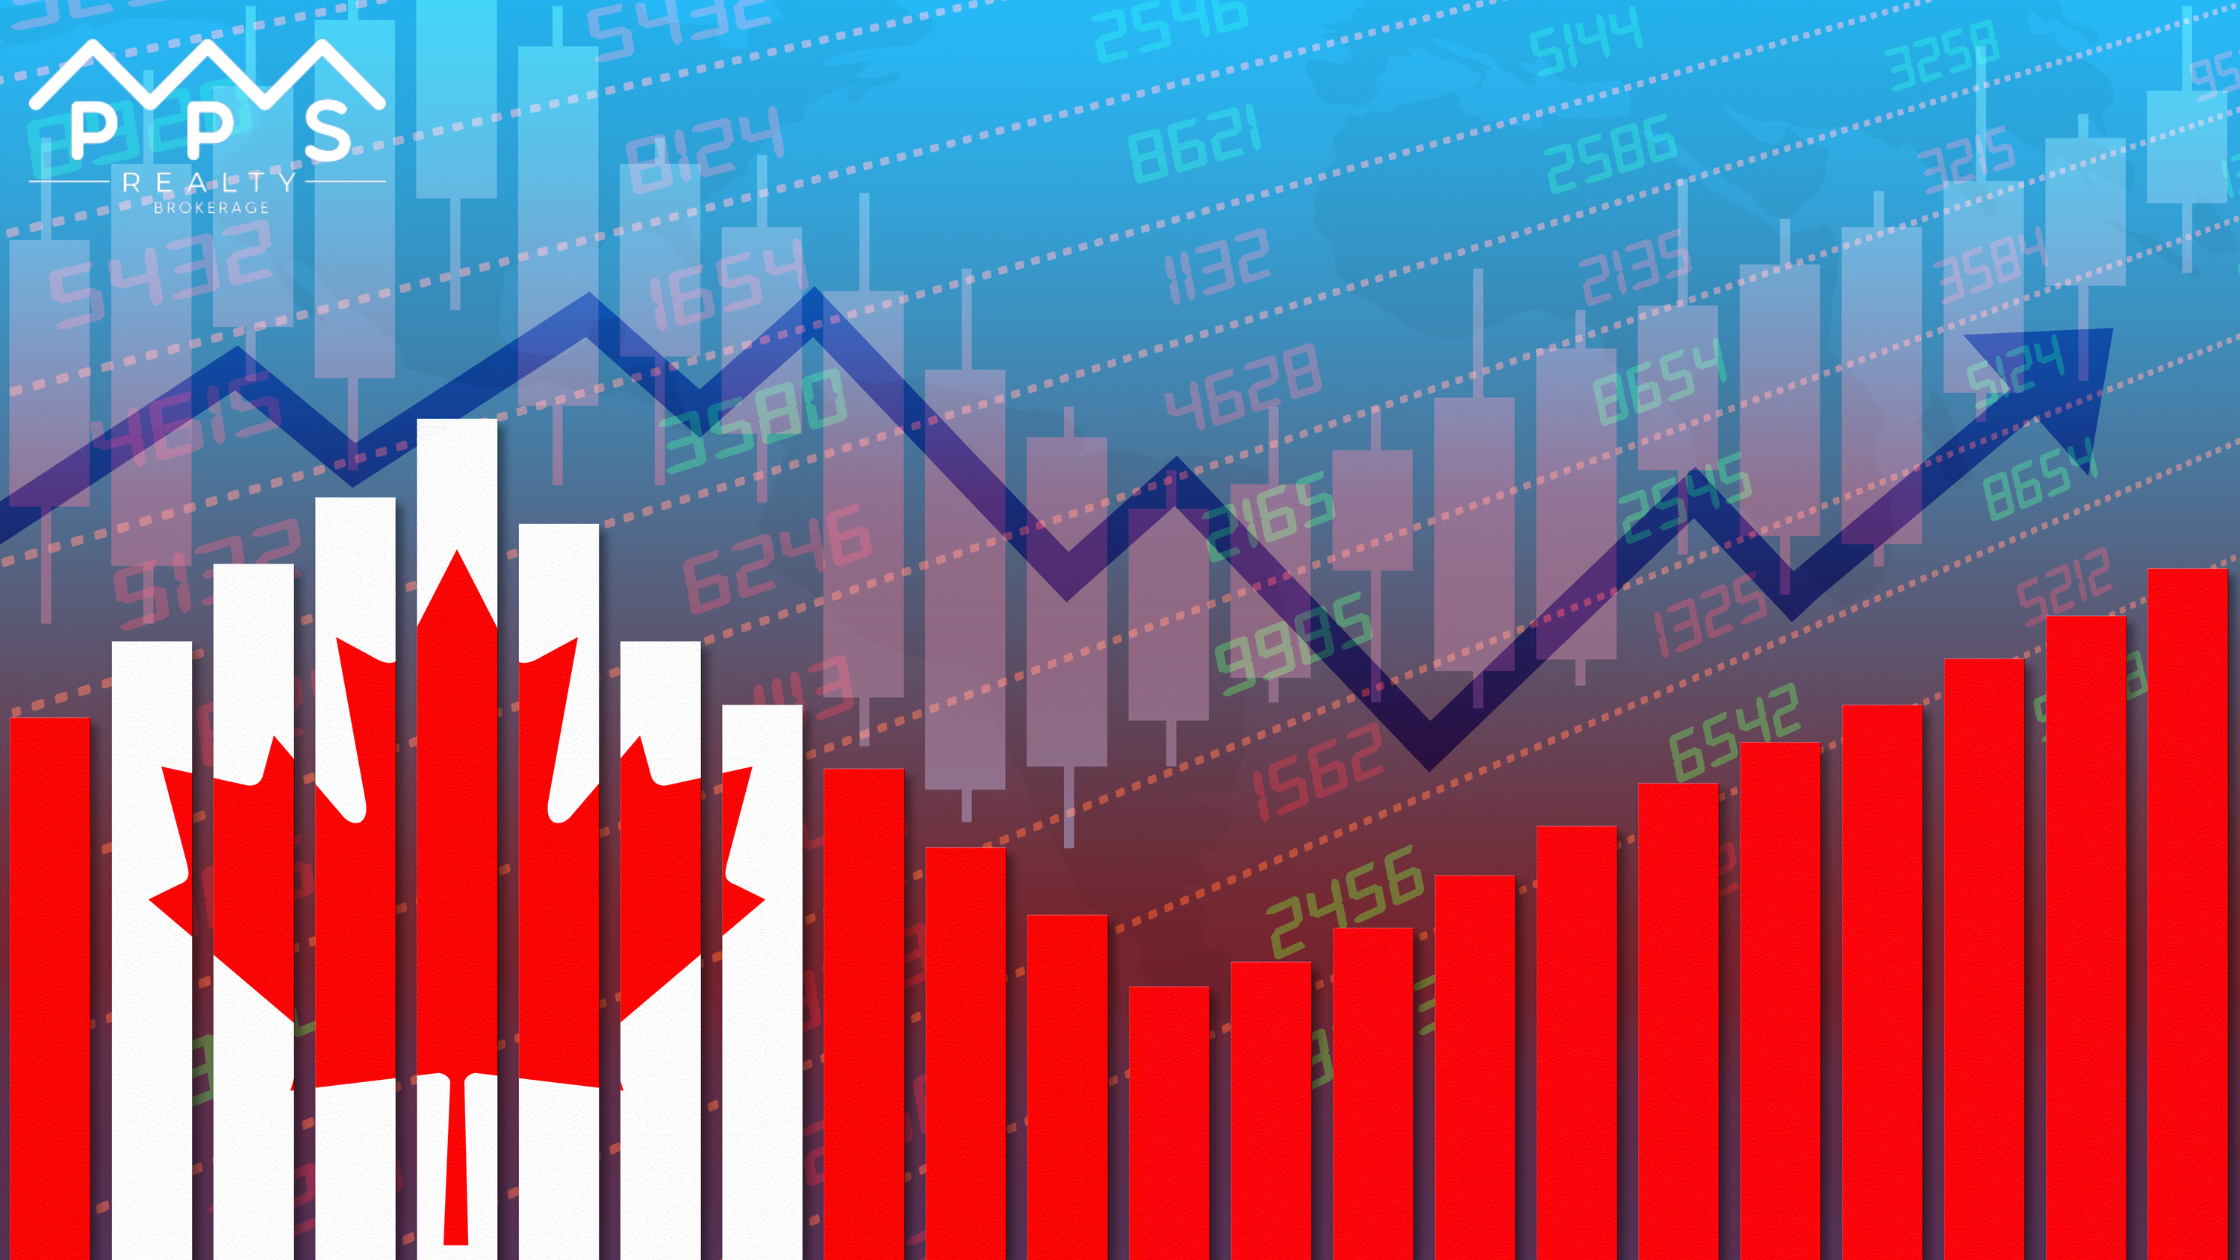 Canadas flag as a bar graph showing inflation hike and data